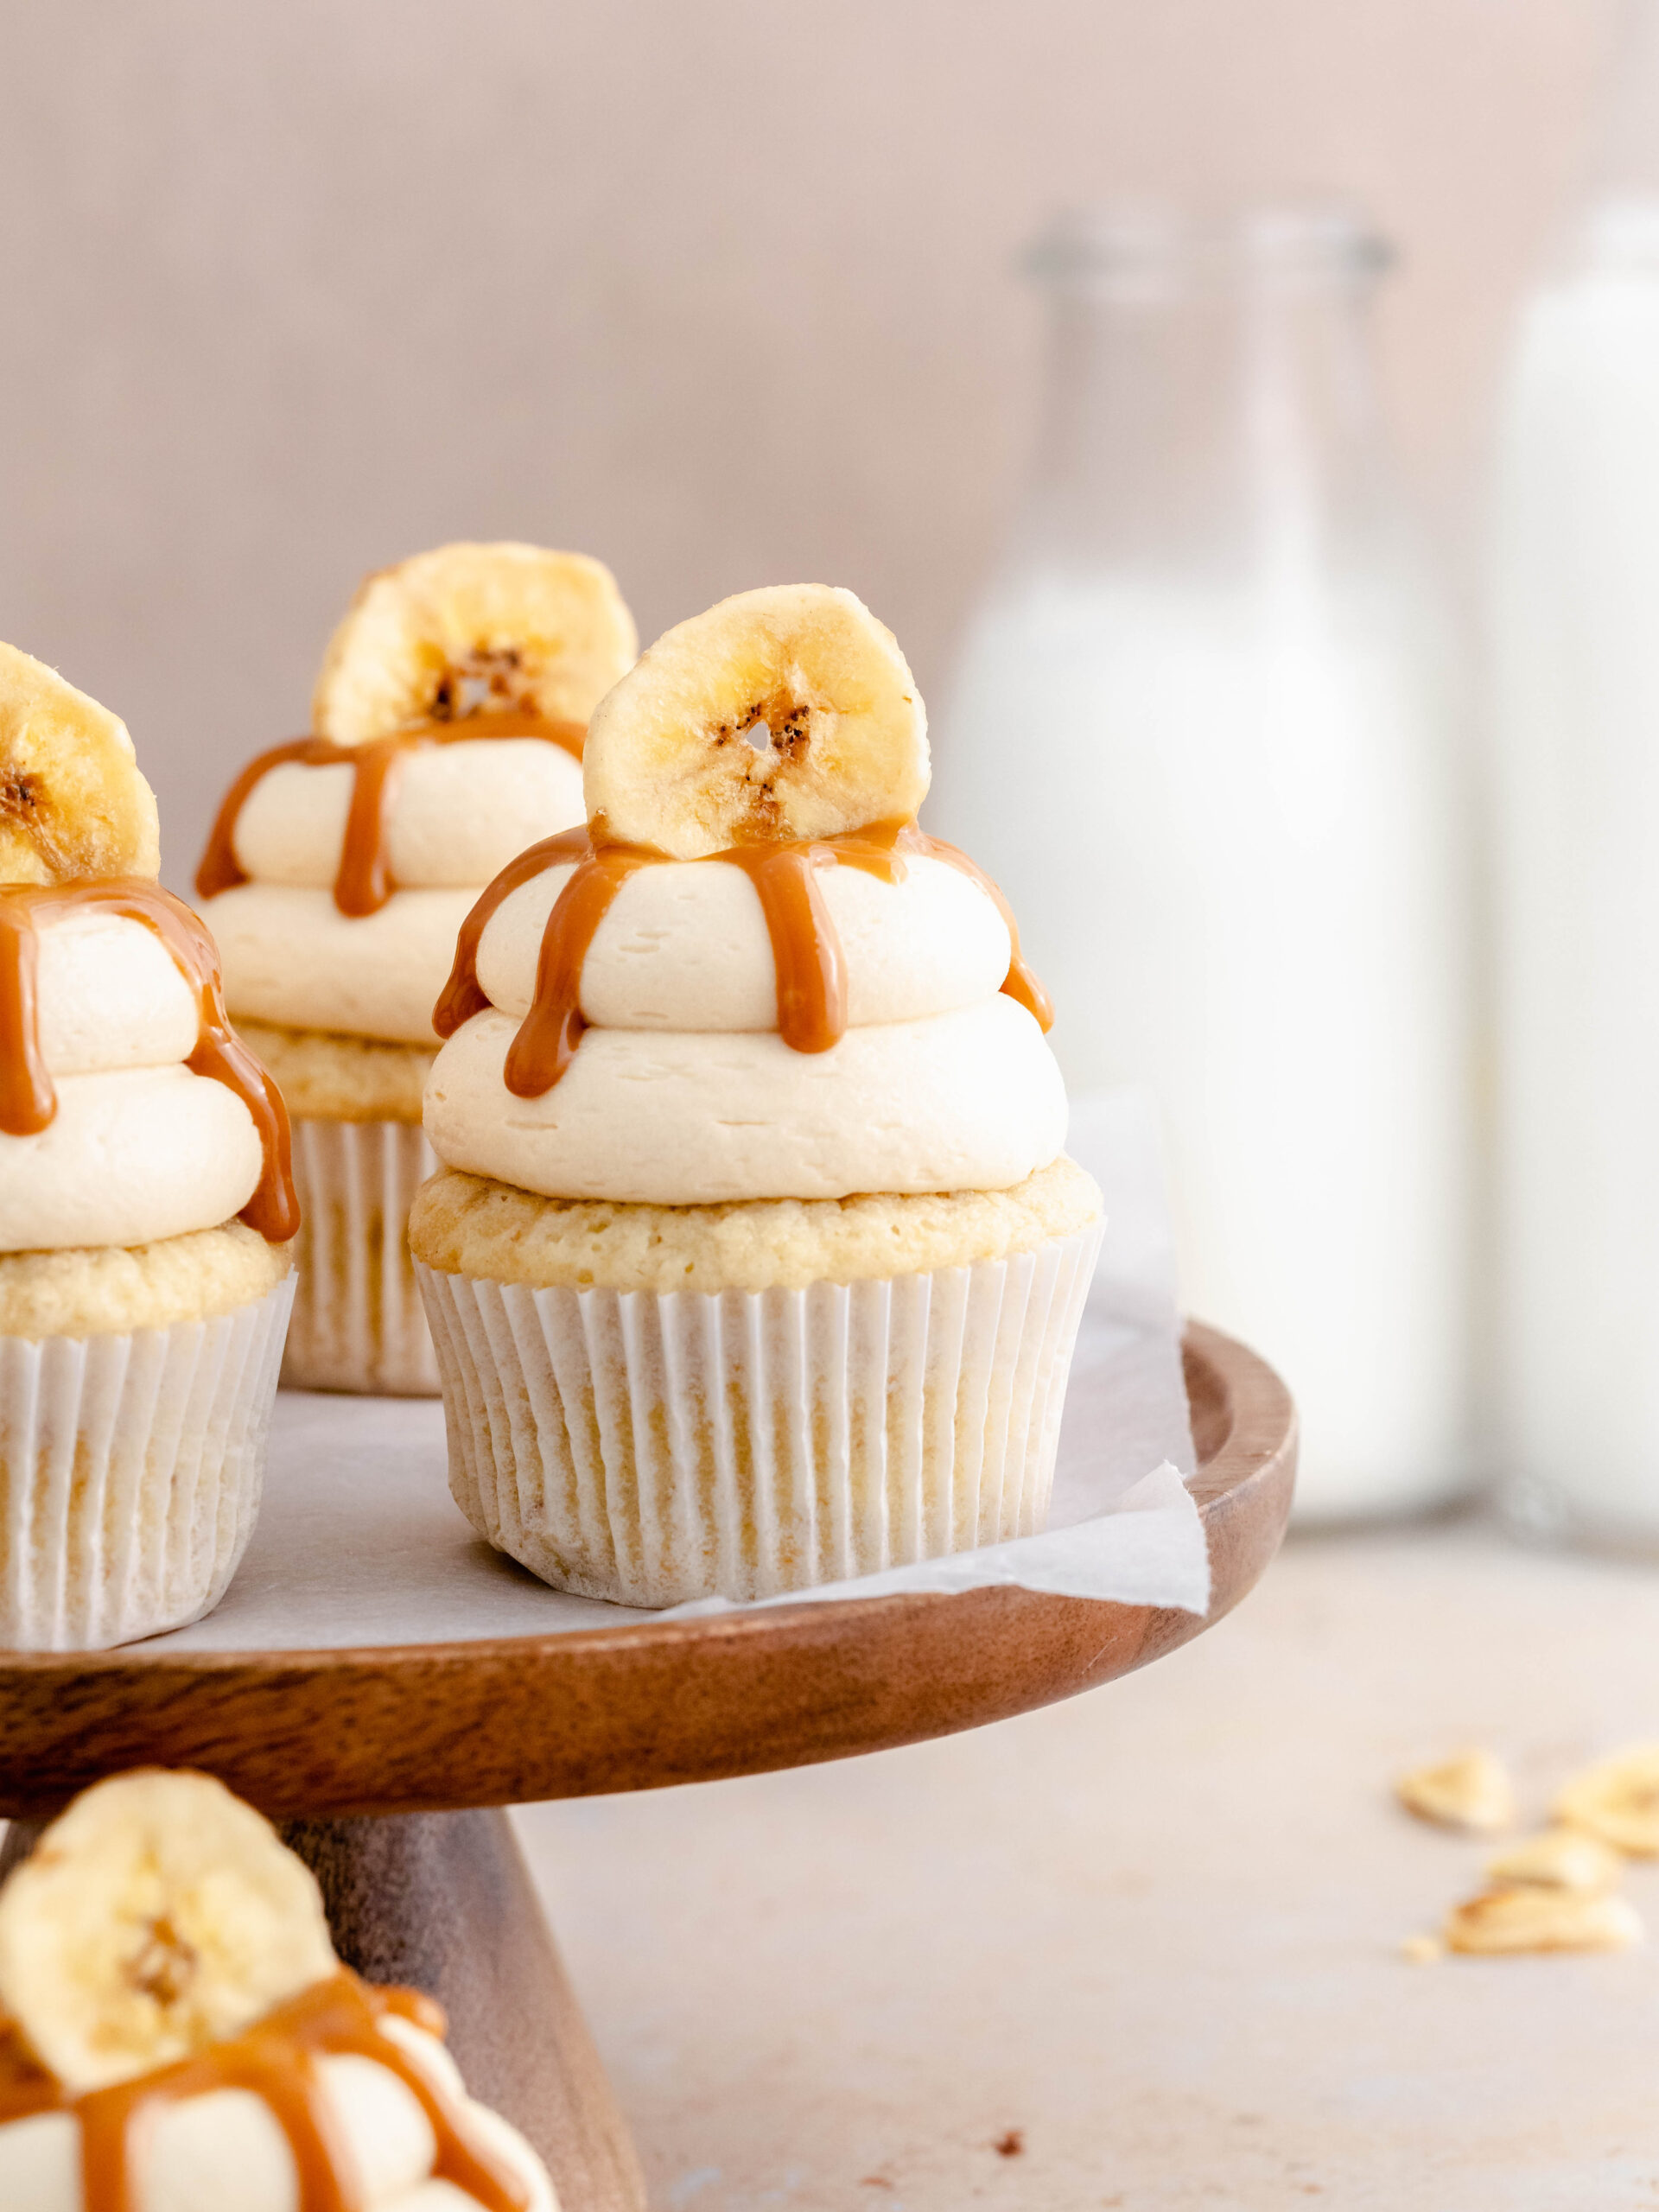 Banoffee cupcakes on a stand.